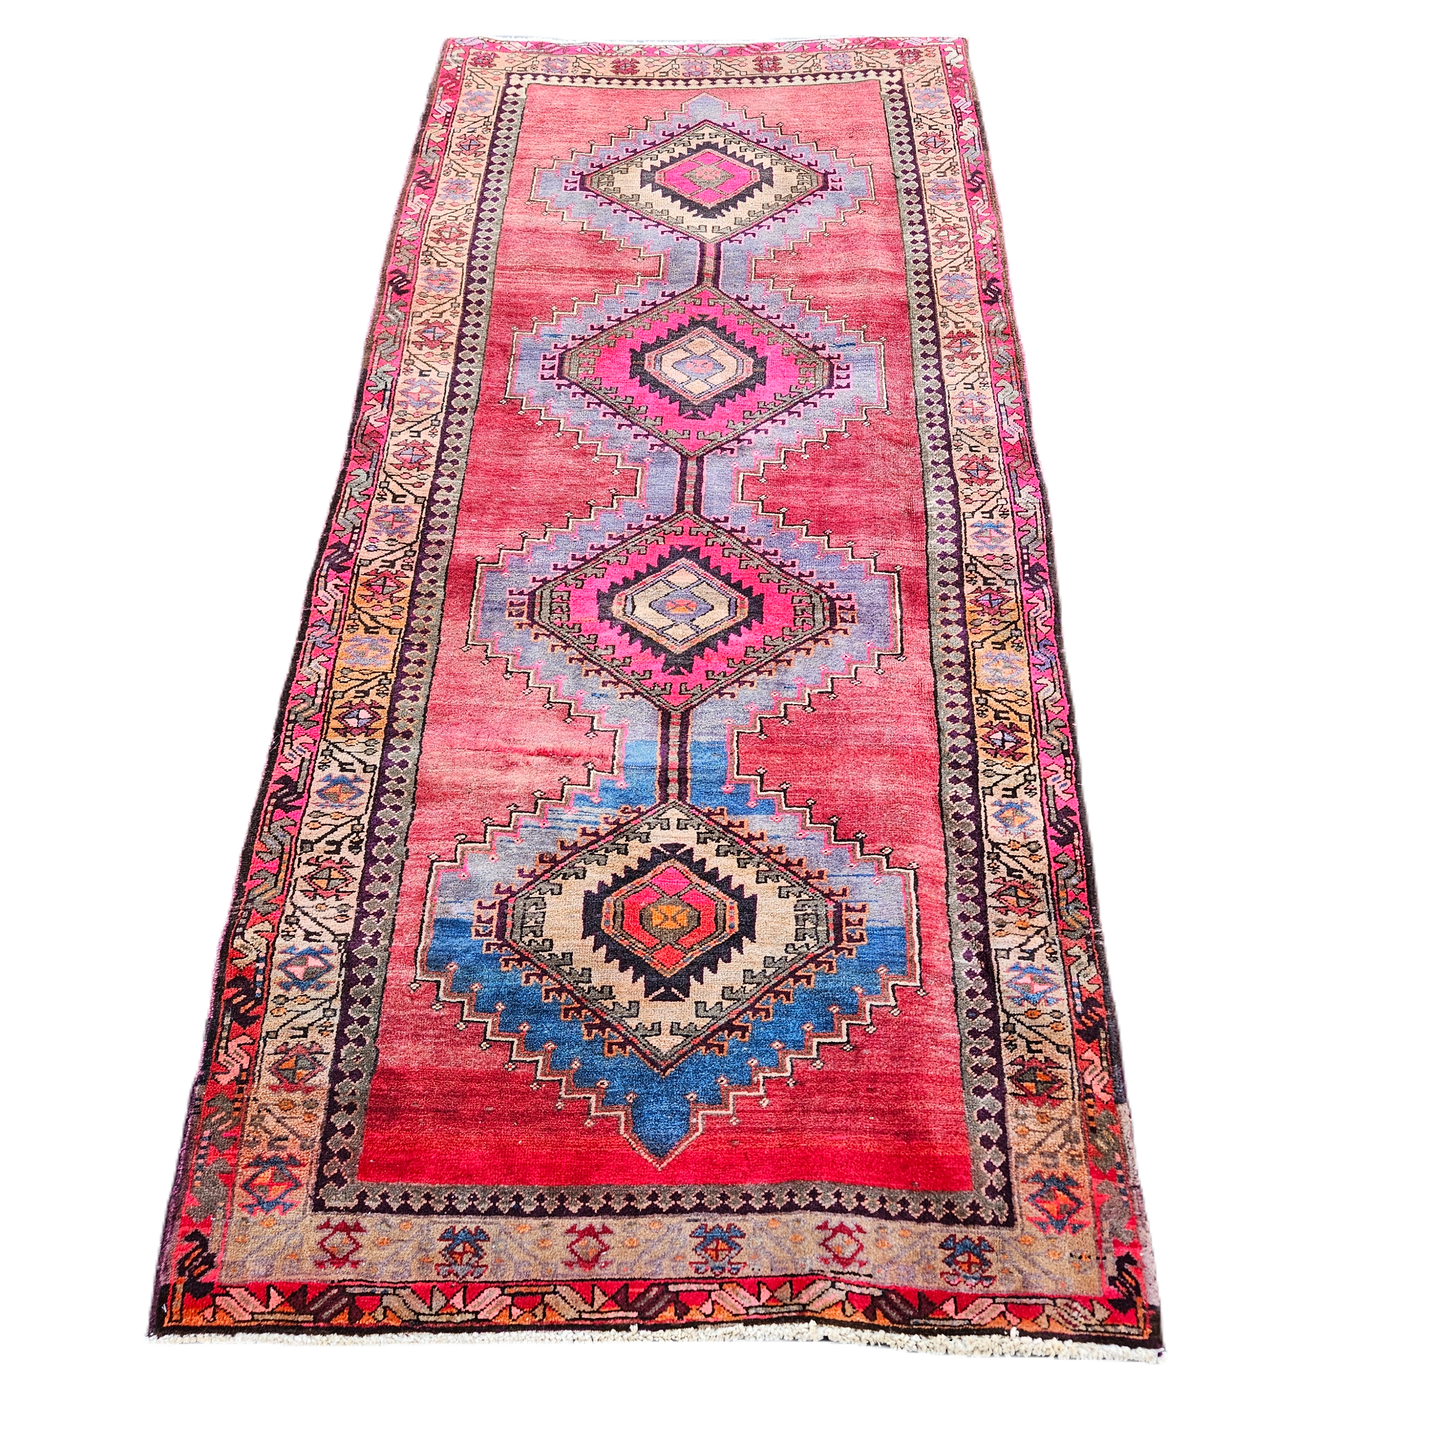 Antique 100% Wool Hand Knotted Red Runner Rug - 3' 10" x 8' 4"